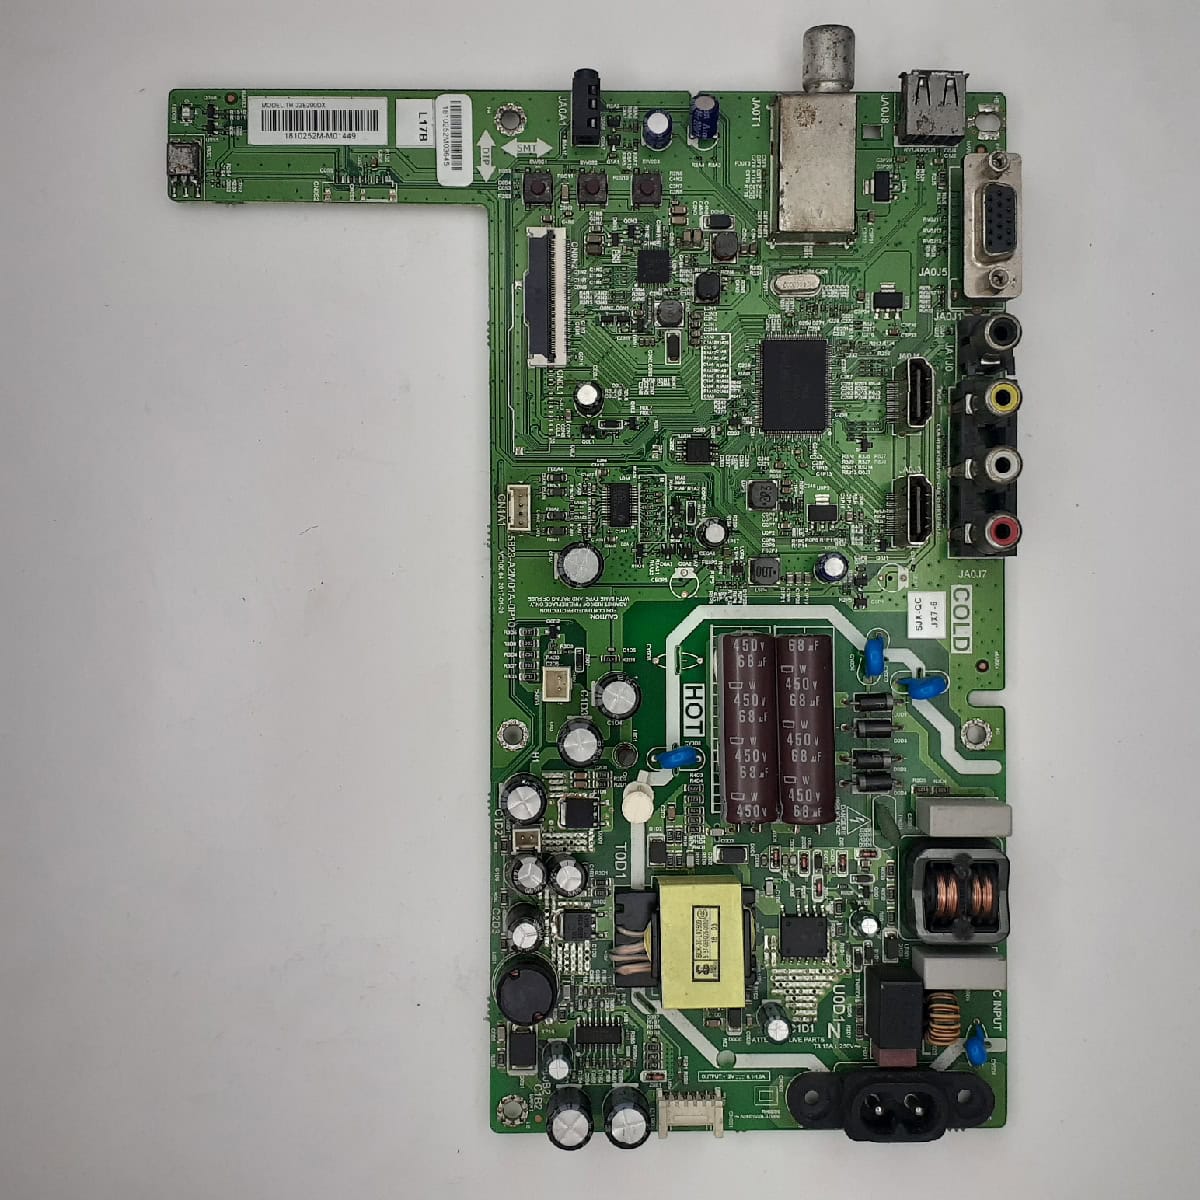 TH-32E200DX PANASONIC MOTHERBOARD FOR LED TV